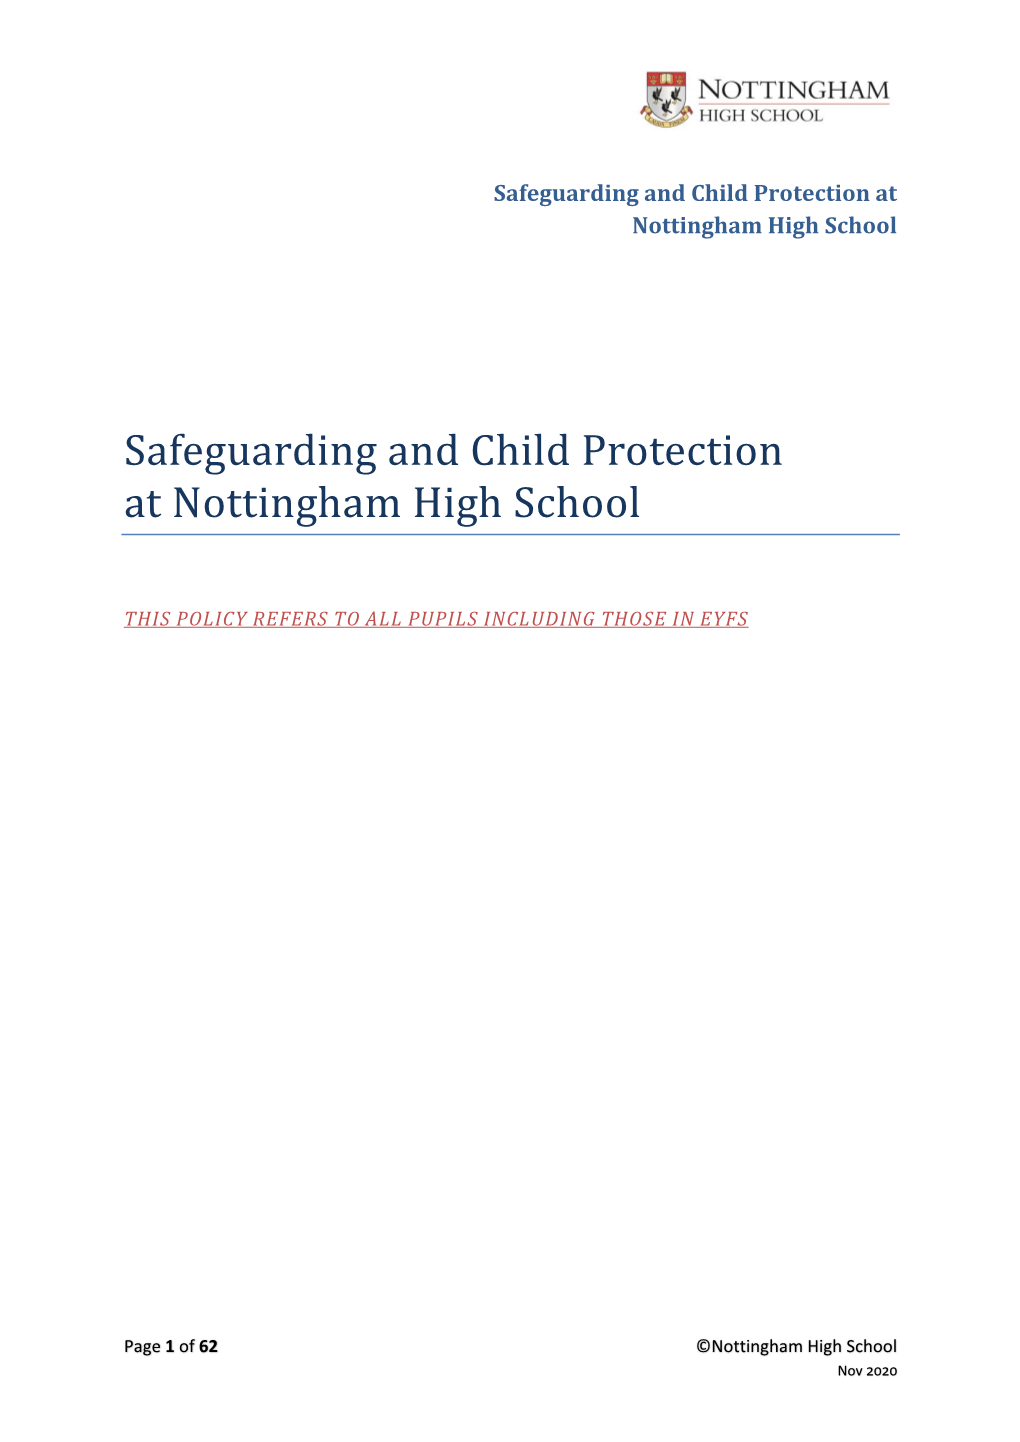 Safeguarding and Child Protection at Nottingham High School